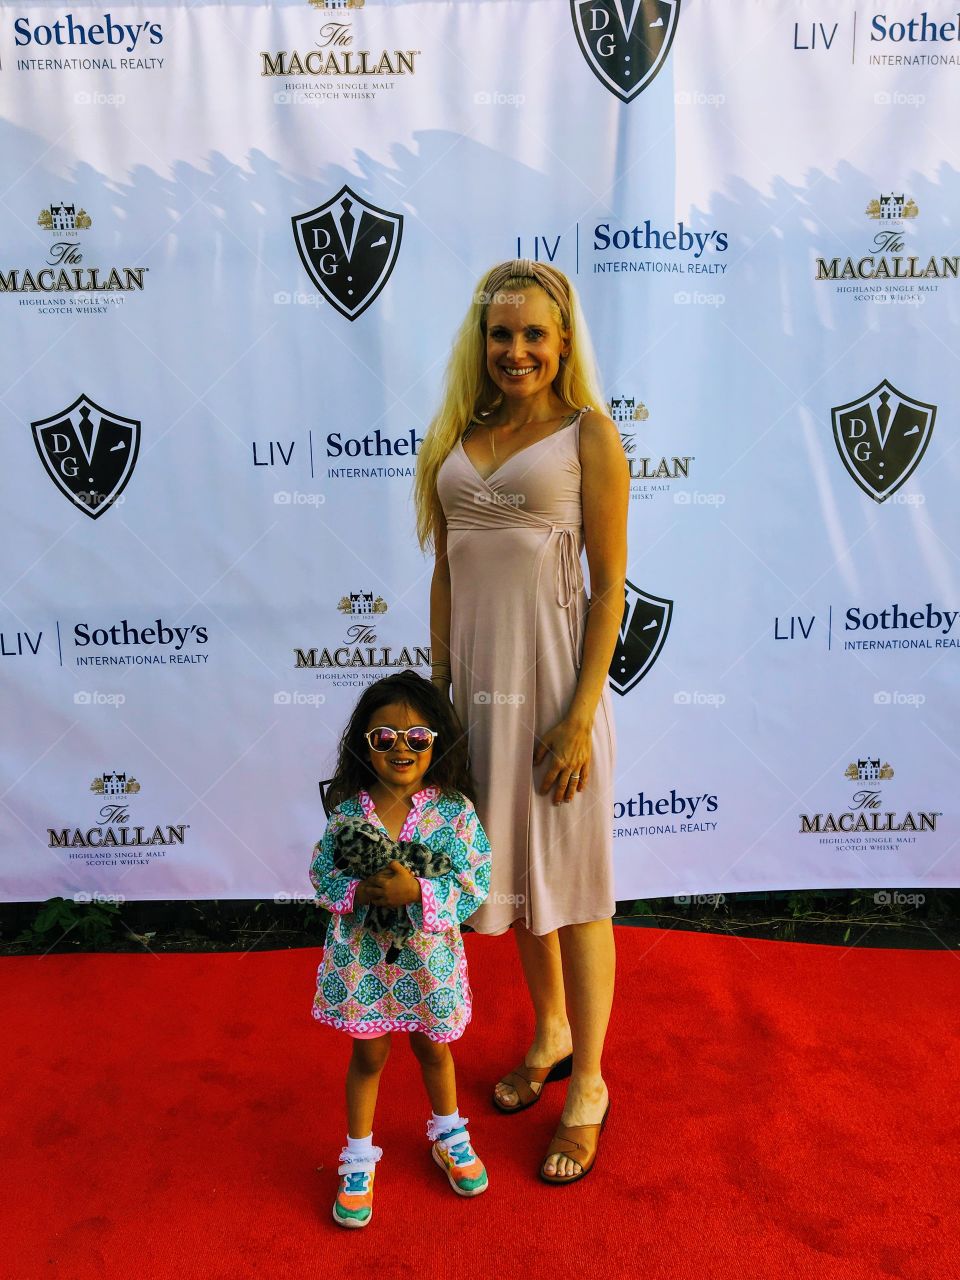 Walking down the scarlet red carpet 
pausing 
and posing
for photos
with beautiful young child